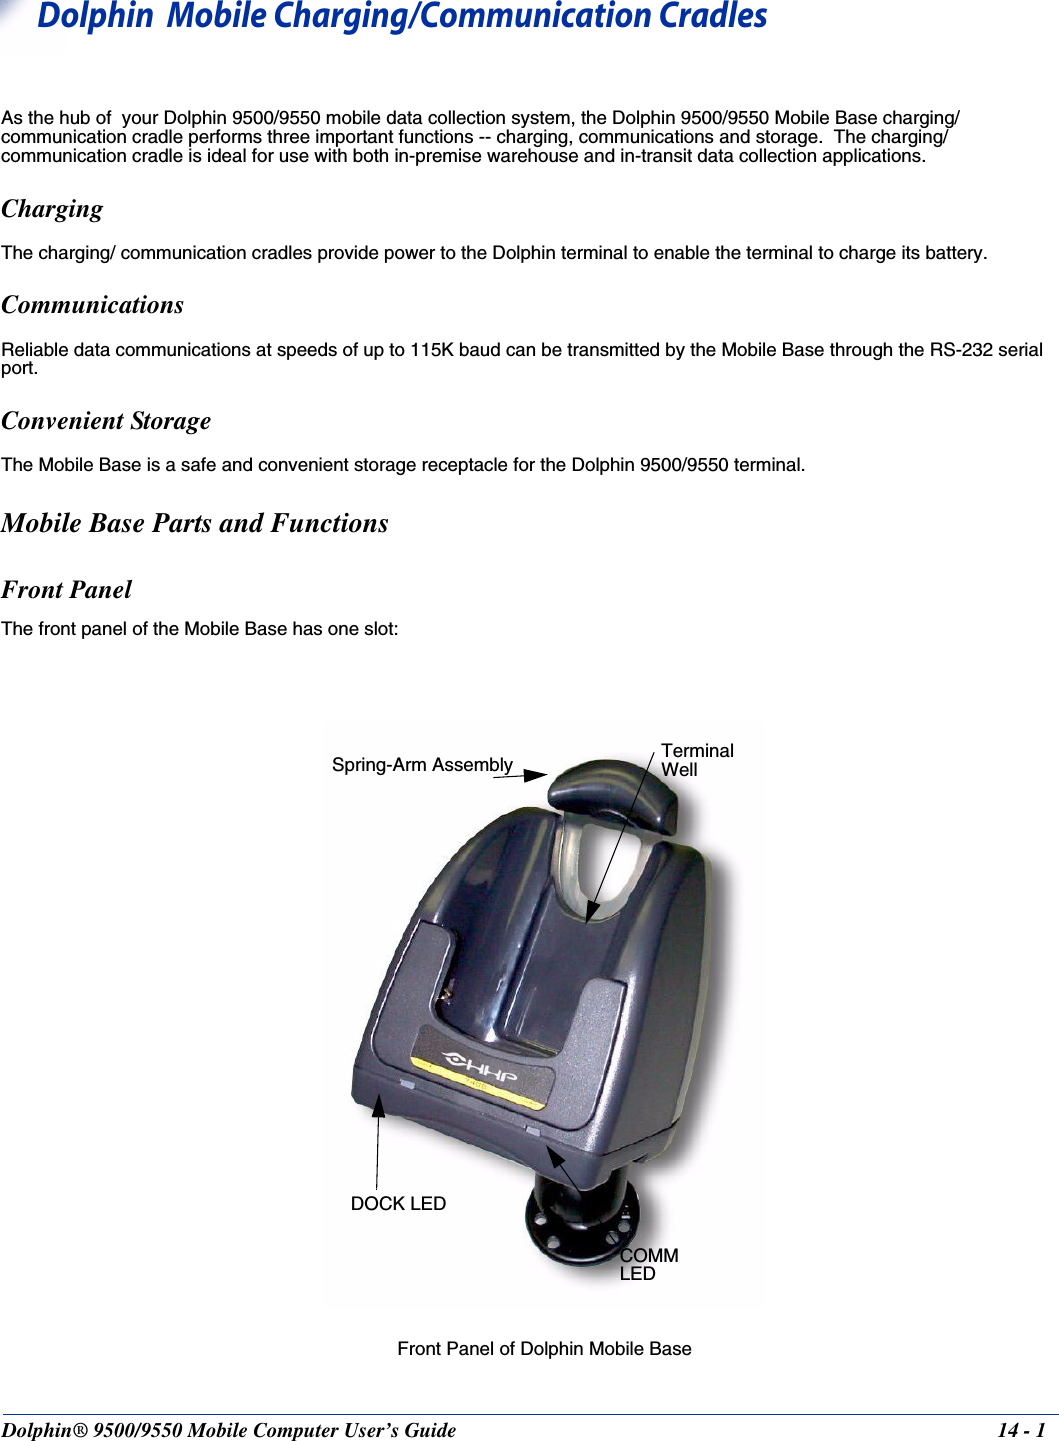 Dolphin® 9500/9550 Mobile Computer User’s Guide 14 - 114Dolphin  Mobile Charging/Communication CradlesAs the hub of  your Dolphin 9500/9550 mobile data collection system, the Dolphin 9500/9550 Mobile Base charging/communication cradle performs three important functions -- charging, communications and storage.  The charging/communication cradle is ideal for use with both in-premise warehouse and in-transit data collection applications.ChargingThe charging/ communication cradles provide power to the Dolphin terminal to enable the terminal to charge its battery.CommunicationsReliable data communications at speeds of up to 115K baud can be transmitted by the Mobile Base through the RS-232 serial port.Convenient Storage The Mobile Base is a safe and convenient storage receptacle for the Dolphin 9500/9550 terminal.  Mobile Base Parts and FunctionsFront PanelThe front panel of the Mobile Base has one slot:Front Panel of Dolphin Mobile BaseTerminal WellDOCK LEDCOMM              LEDSpring-Arm Assembly